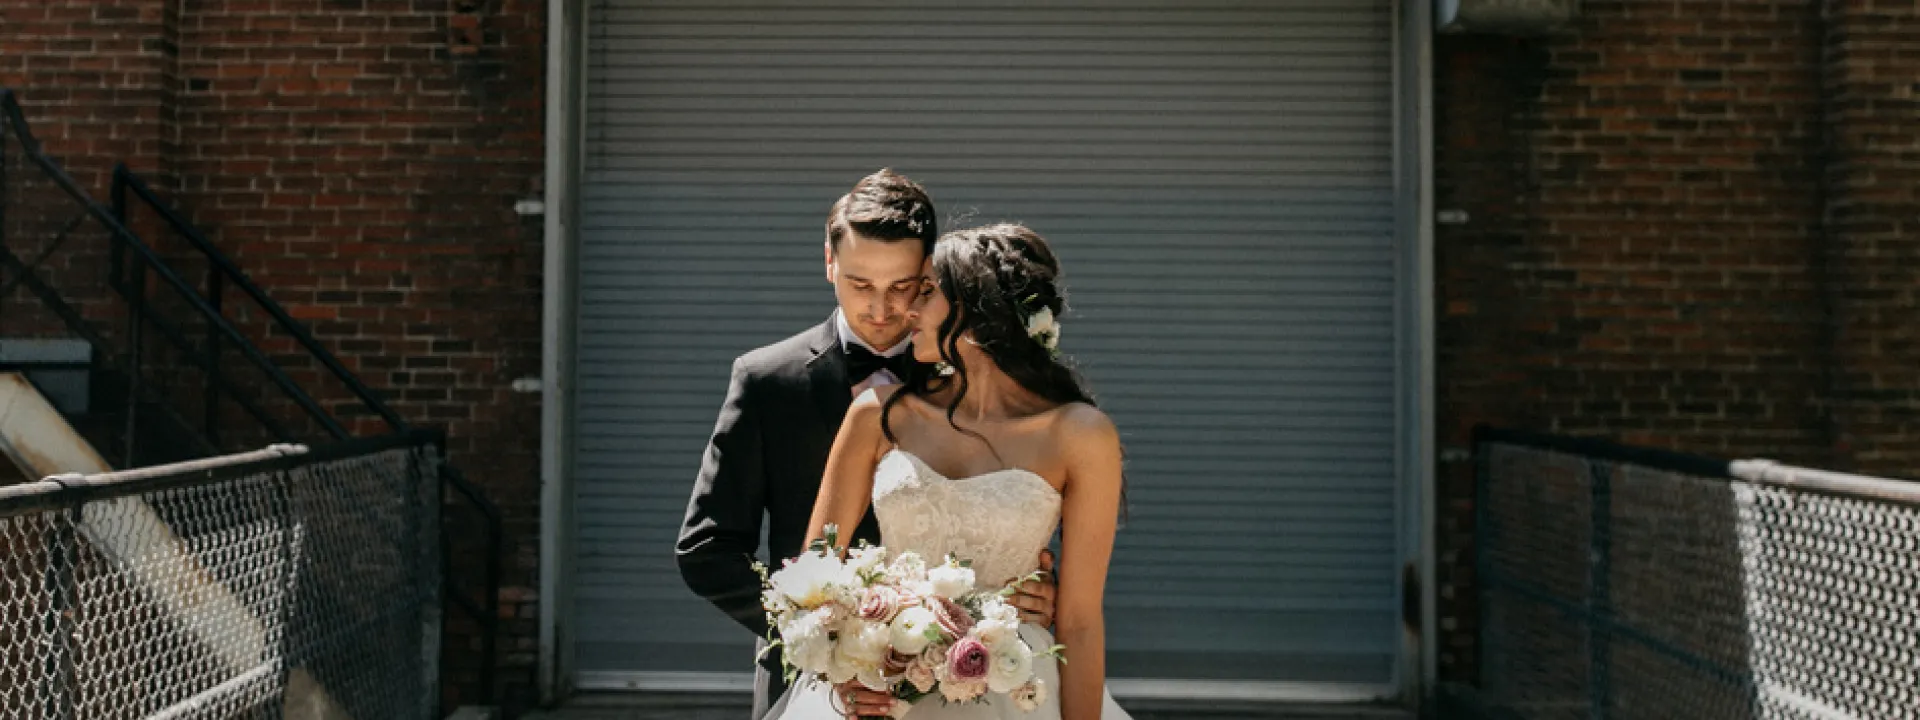 Wedding Photography at the Solar Arts Building in Minneapolis